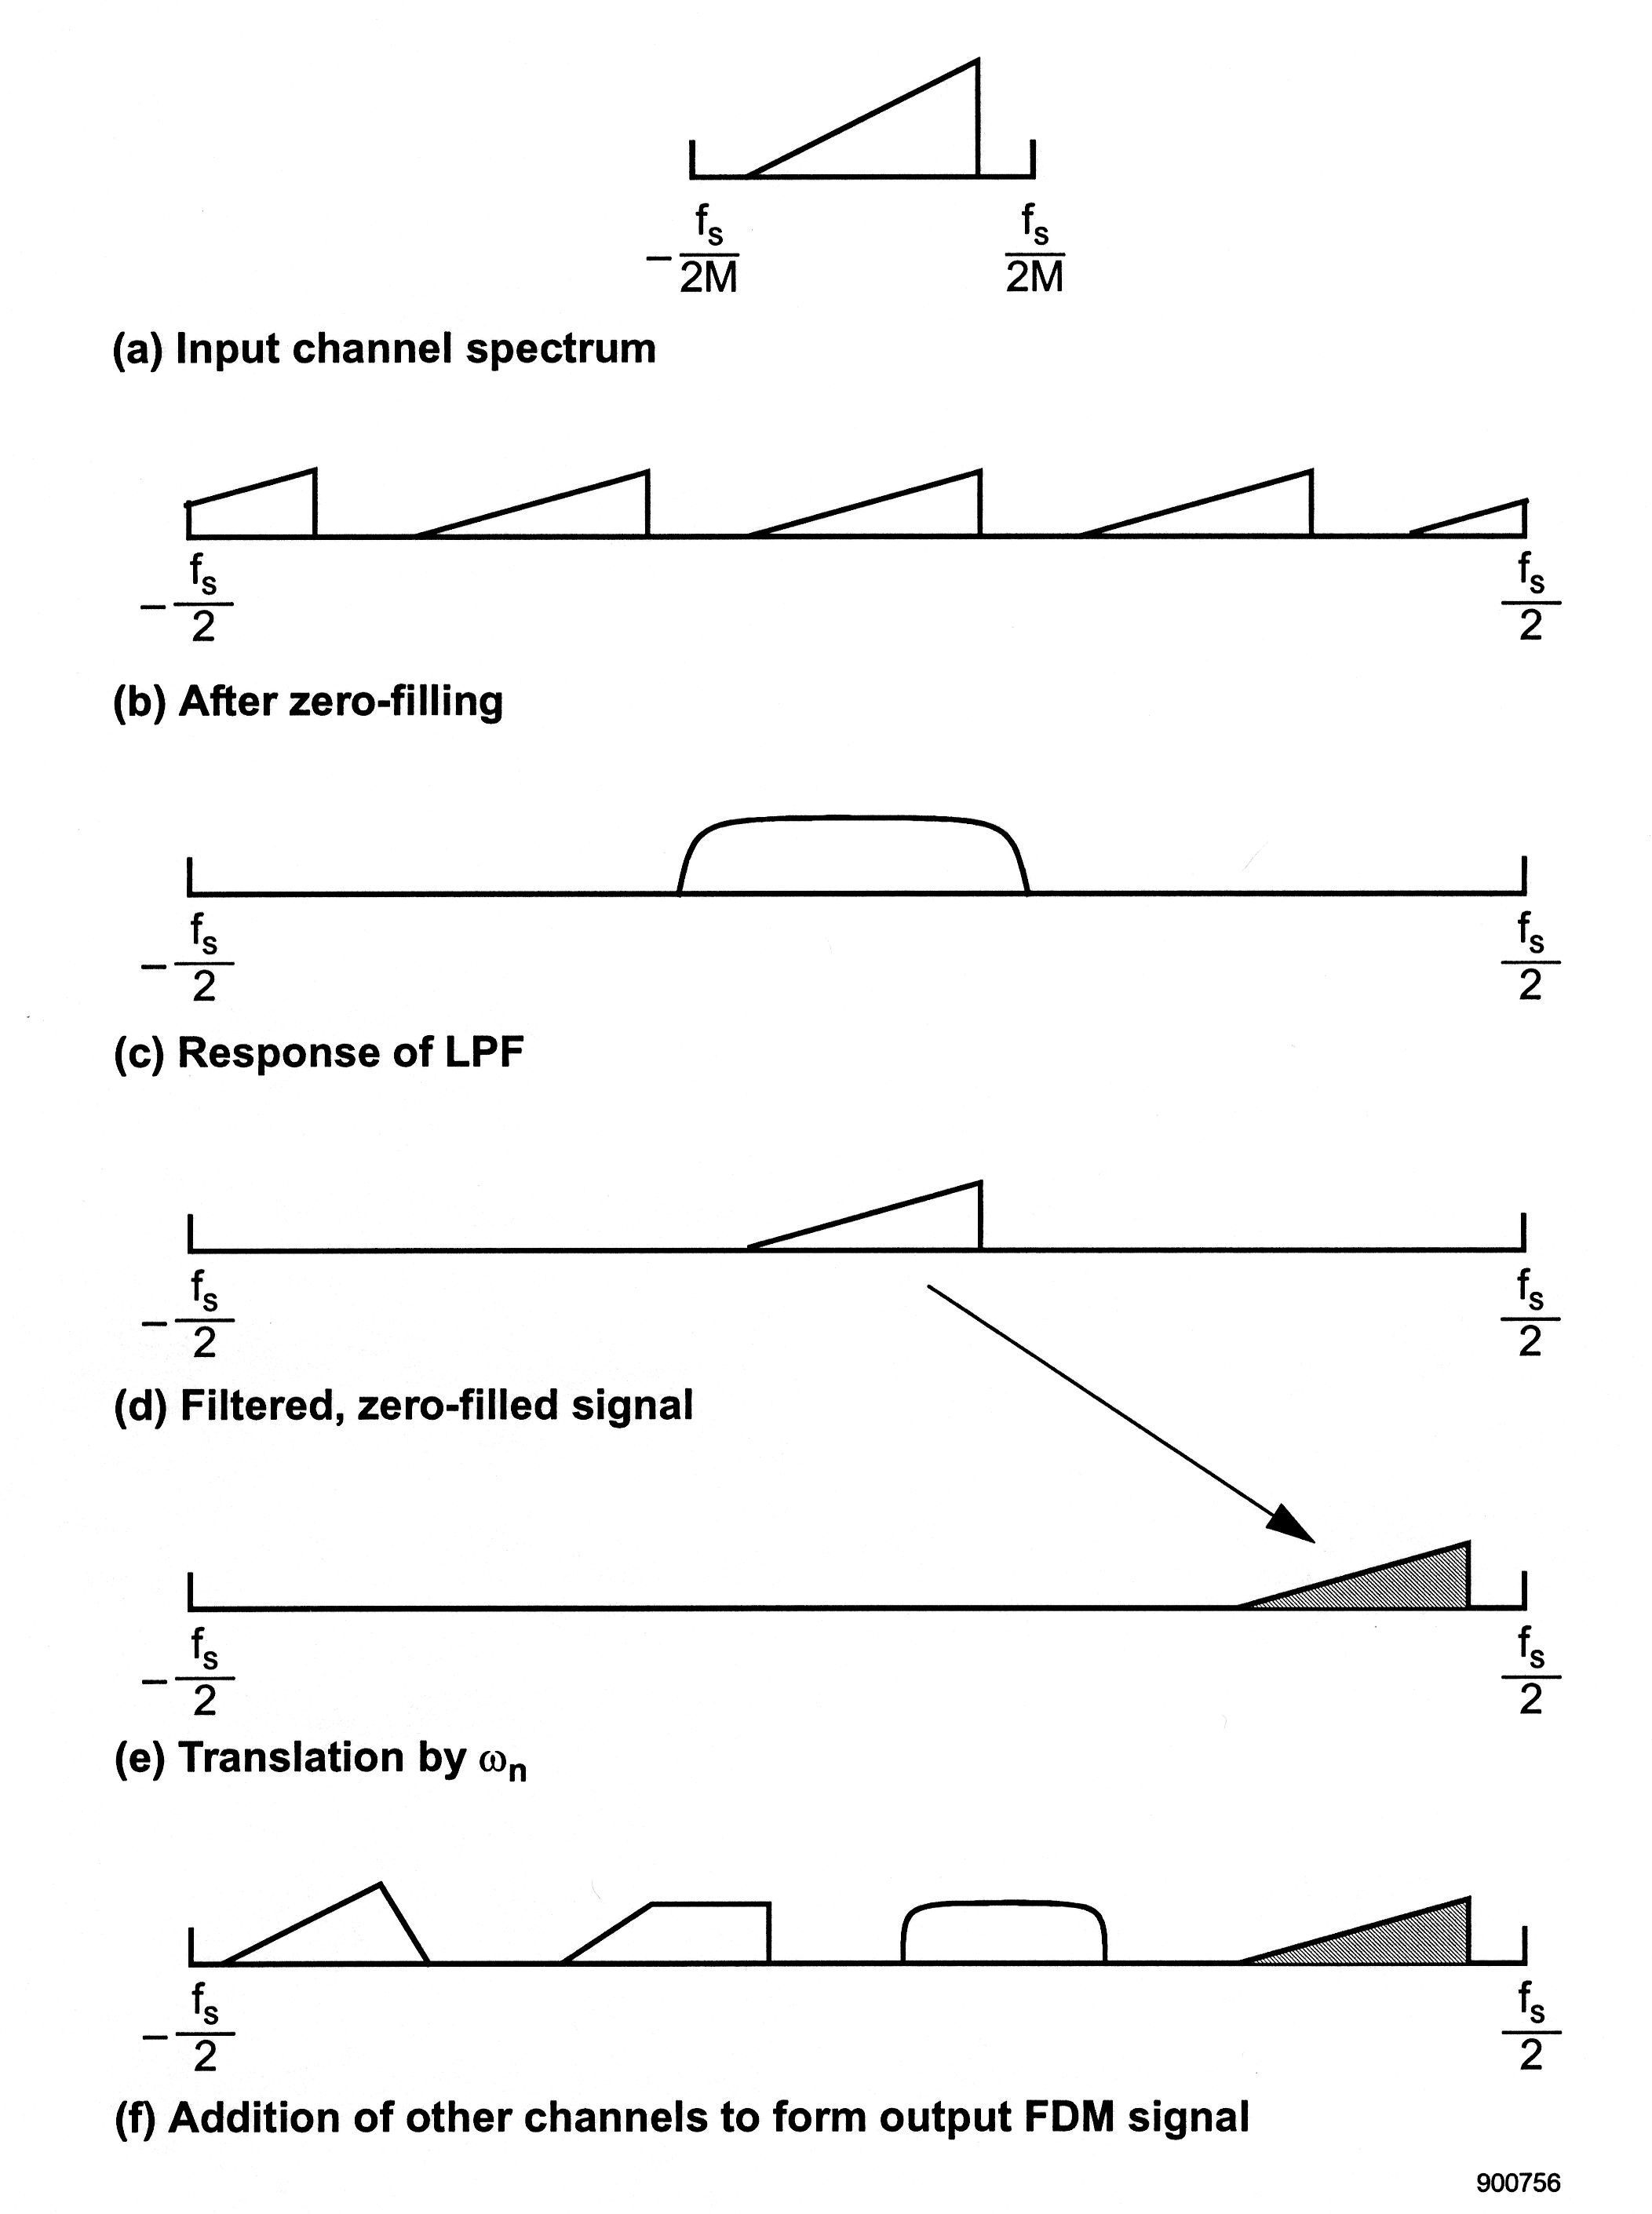 This figure consists of 6 images. The first image is labeled (a) Input channel spectrum and consist of a horizontal line on which sits a right triangle where the right angle is formed by the horizontal line and a line rising perpendicular to it on the right side of the line. On the left end of the horizontal line is a small vertical line under which is the mathematical expression f_s/-2M. On the right end of the horizontal line is a small vertical line under which is the mathematical expression f_s/2M. The next figure is labeled (b) After zero-filing. The image consist of a horizontal line whose extremes are labeled -f_s/2 on the left and f_s/2 on the right. Sitting on the line are three right triangles like the previously discussed graph, and also a piece of a triangle on the left missing the right most point and a piece of a triangle on the right missing the left half of the triangle. The third image is labeled Response of LPF. The image consist of a horizontal line with the extremes labeled on the left -f_s/2 and f_s/2 on the right. In the middle of this graph shape which has a nearly vertical lines on the left and right that curve at the top and a straight line the continues from here to connect the two lines. These lines in conjuctions with the bottom horizontal line make something like a curved trapazoid. The fourth image is labeled Filtered, zero-filled signal. It consist of a long horizontal line with the extremes labeled -f_s/2 on the left and f_s/2 on the right. In the middle of this line is a lone right triangle. The fifth  image consist of a long horizontal line with its extremes labeled -f_s/2 on the left and f_s/2 on the right. On the far right side of this line is a single shaded right triangle with a line pointing from the previous graphs right triangle to this one. The sixth image consist of a long horizontal line with the extremes labeled -f_s/2 on the left and f_s/2 on the right. On this line from left to right there is a scalene triangle, a trapazoid forming a right angle on the left corners, a figure that looks like half of a square with rounded corners, and a shaded right triangle.